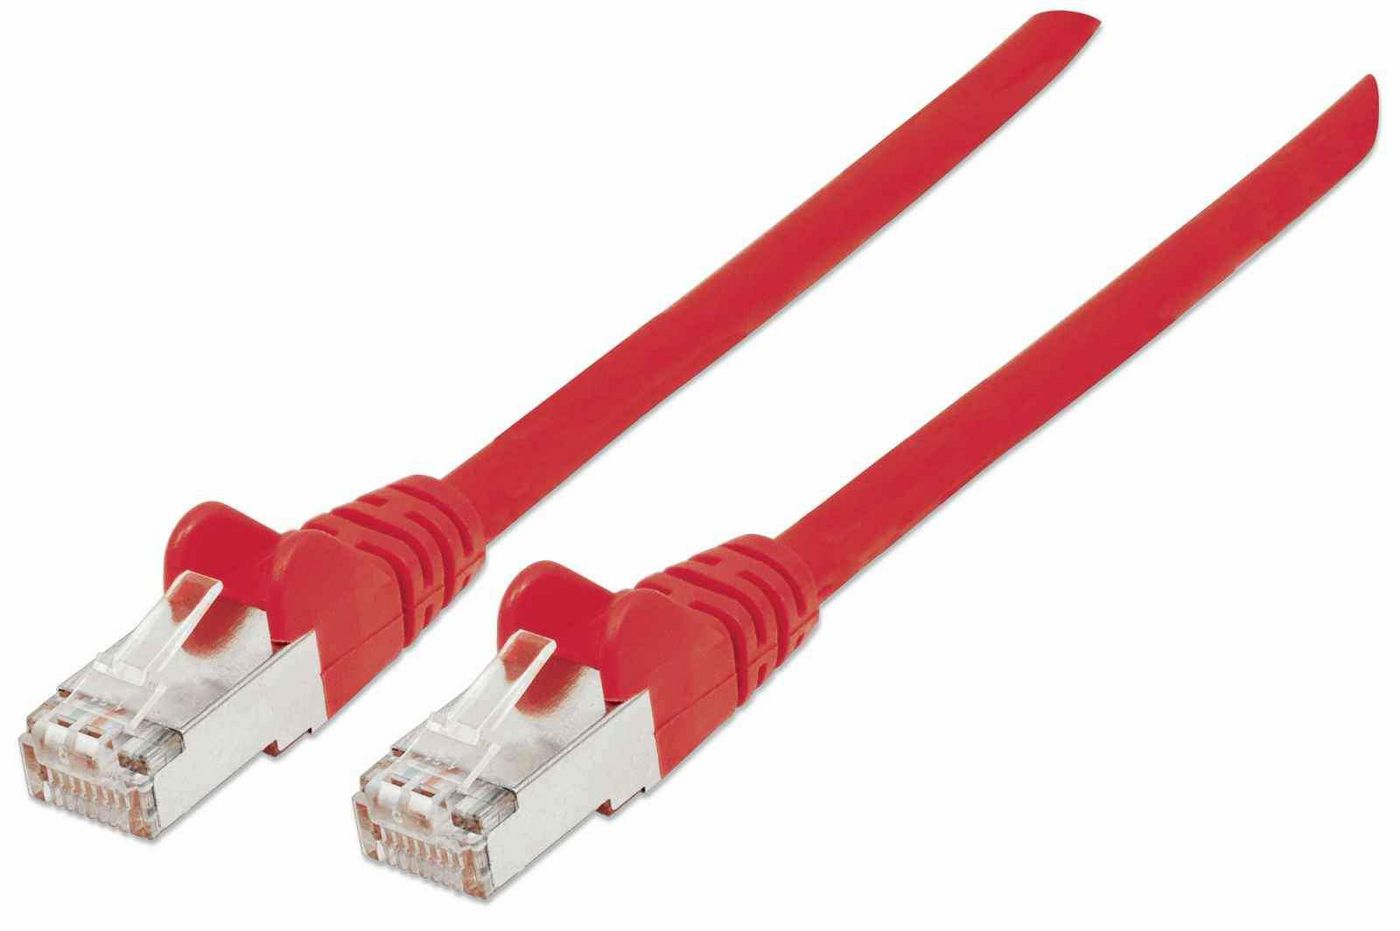 Intellinet 740760 High Performance Network Cable 